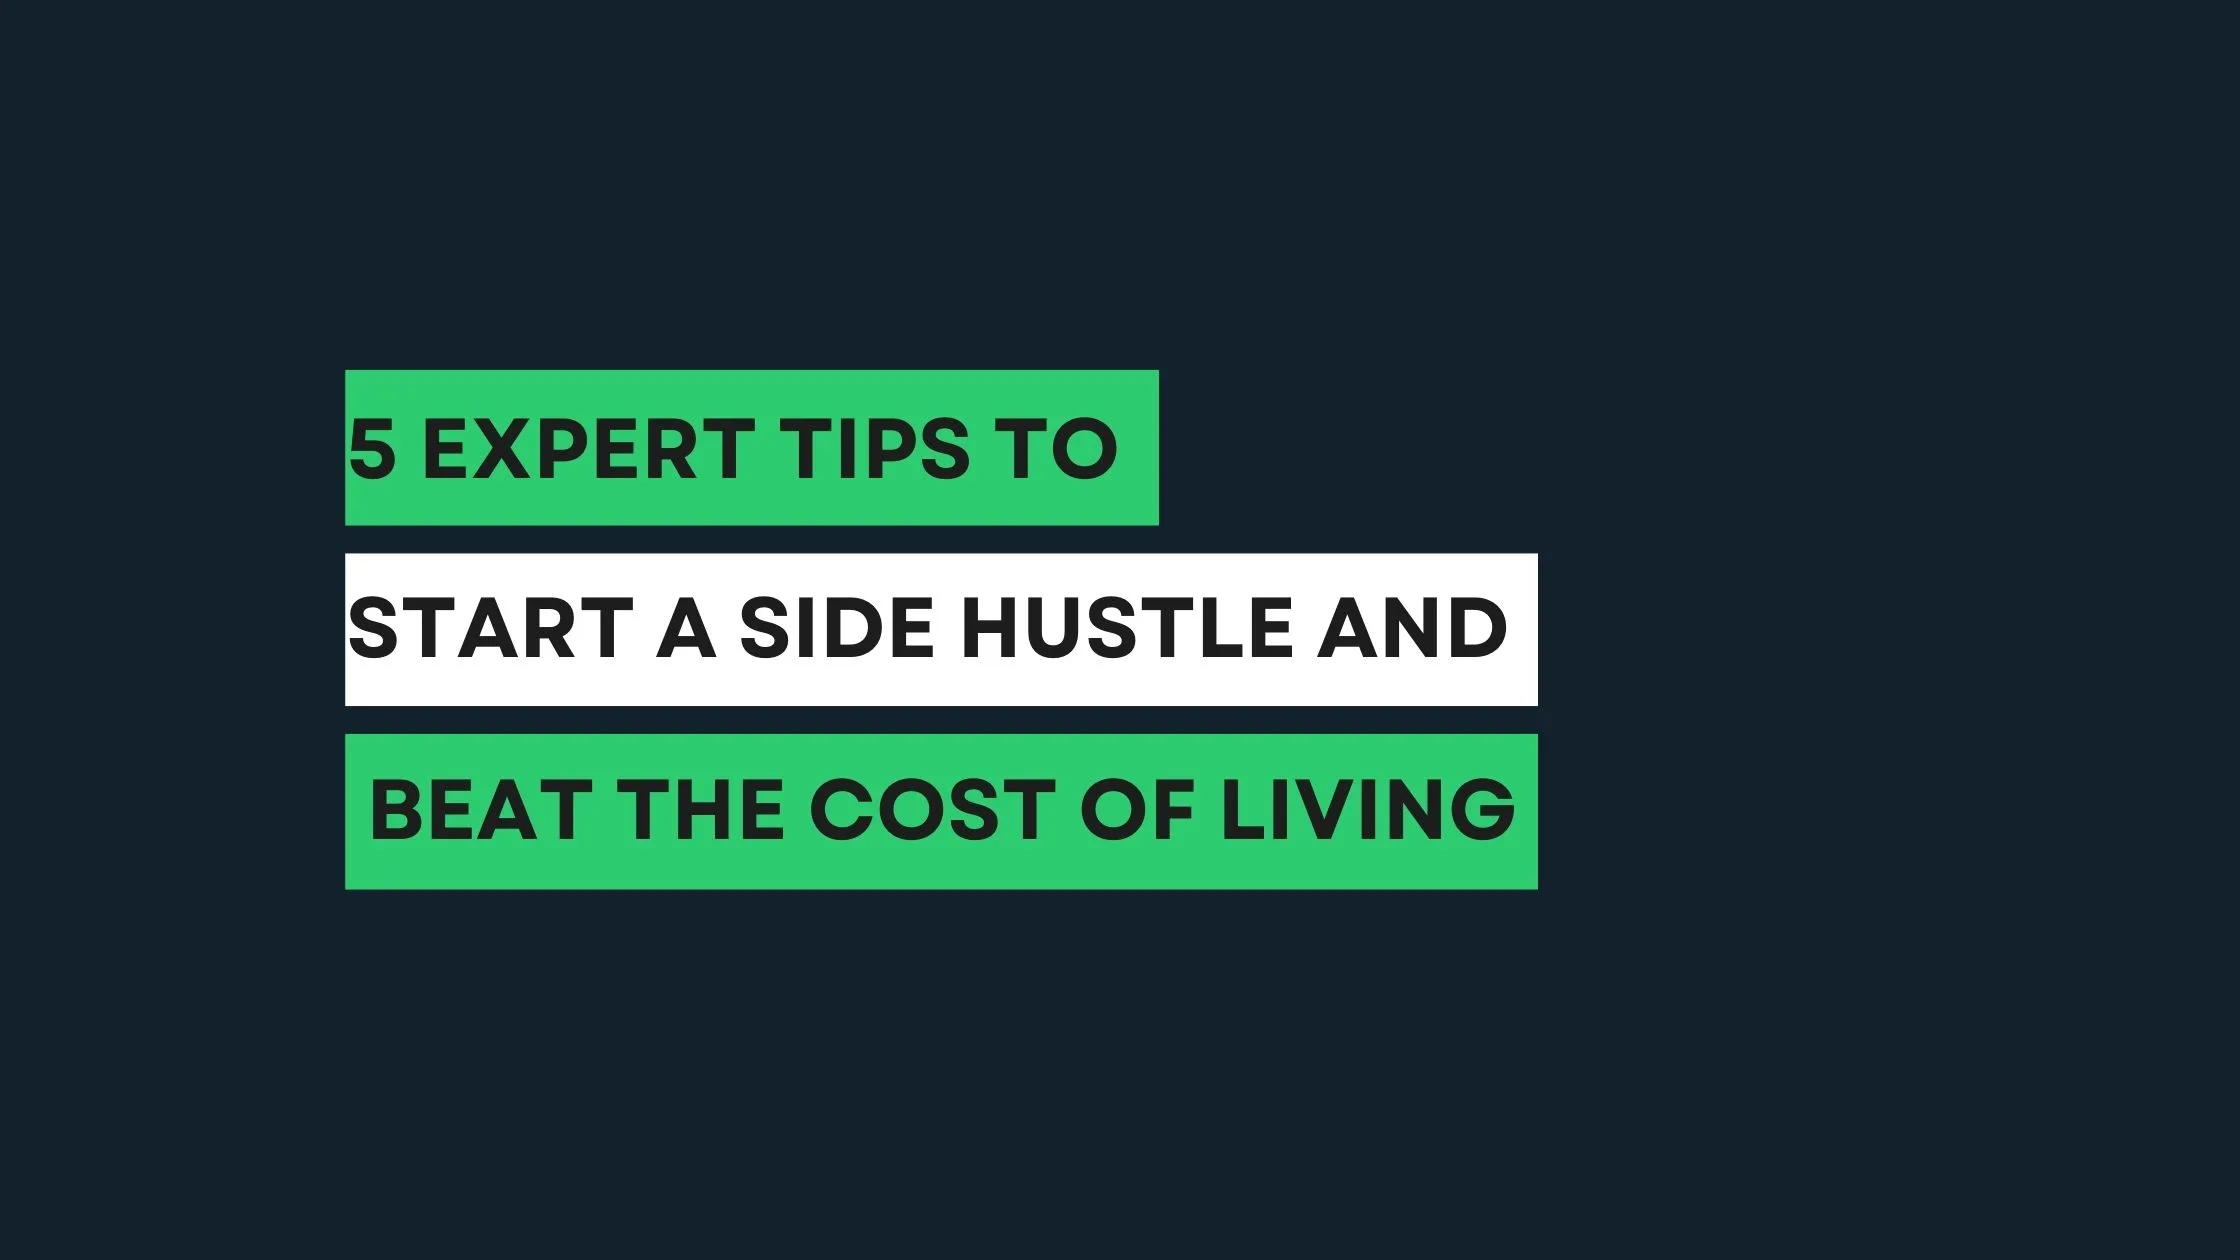 5 Expert tips to Start a Side Hustle and beat the cost of living 1 1 jpg